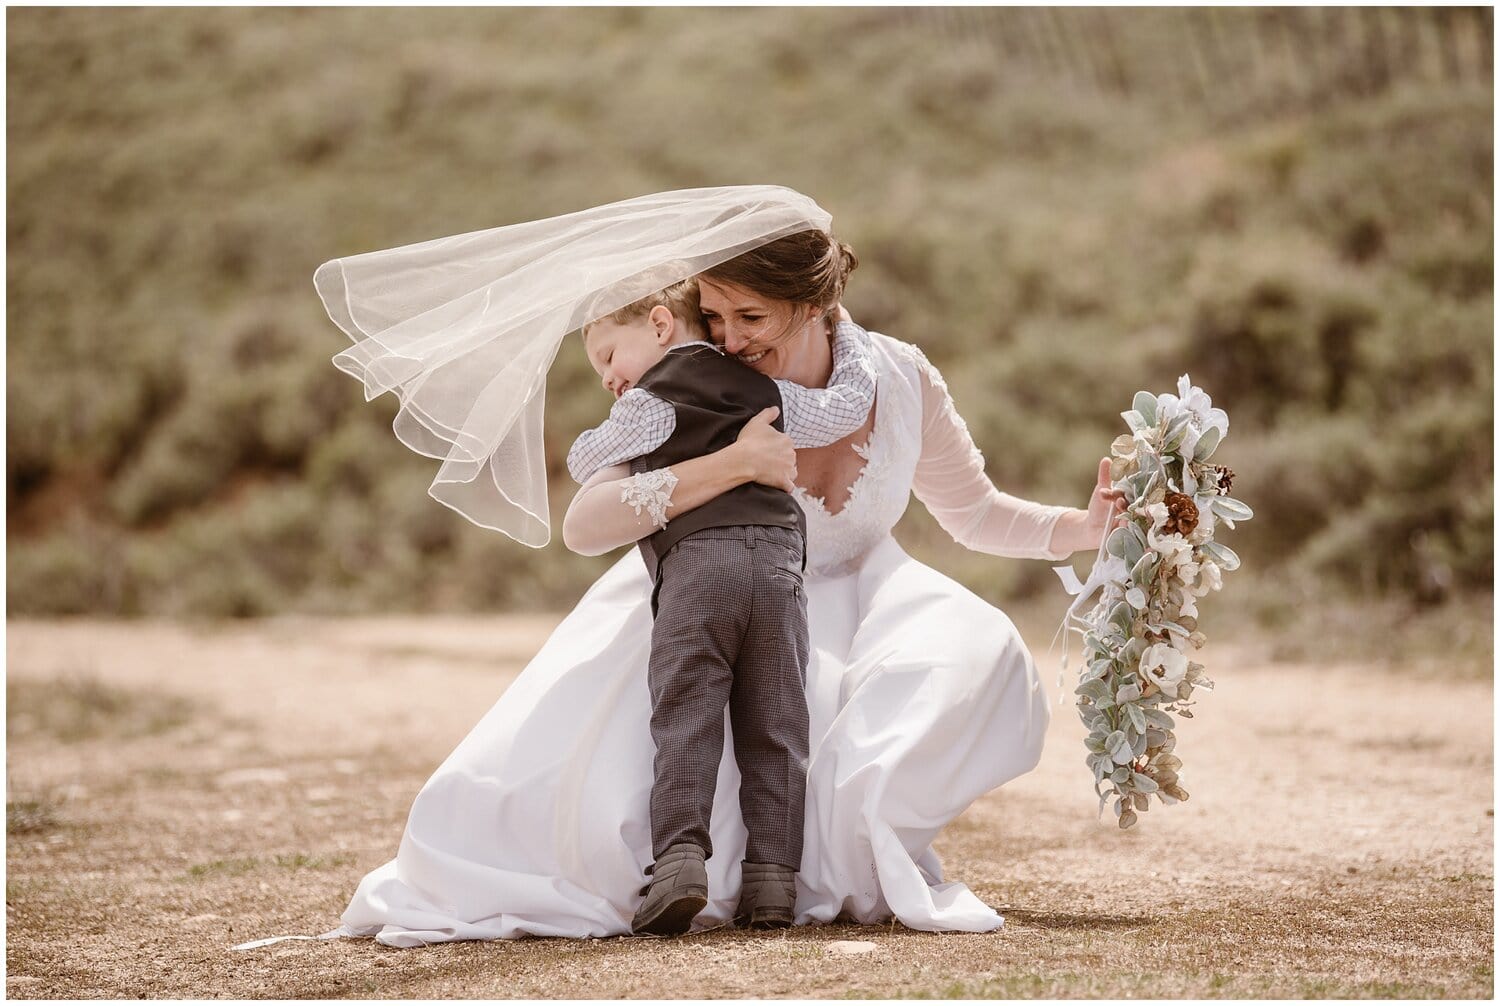 Bride leans down to hug boy, both are smiling. 